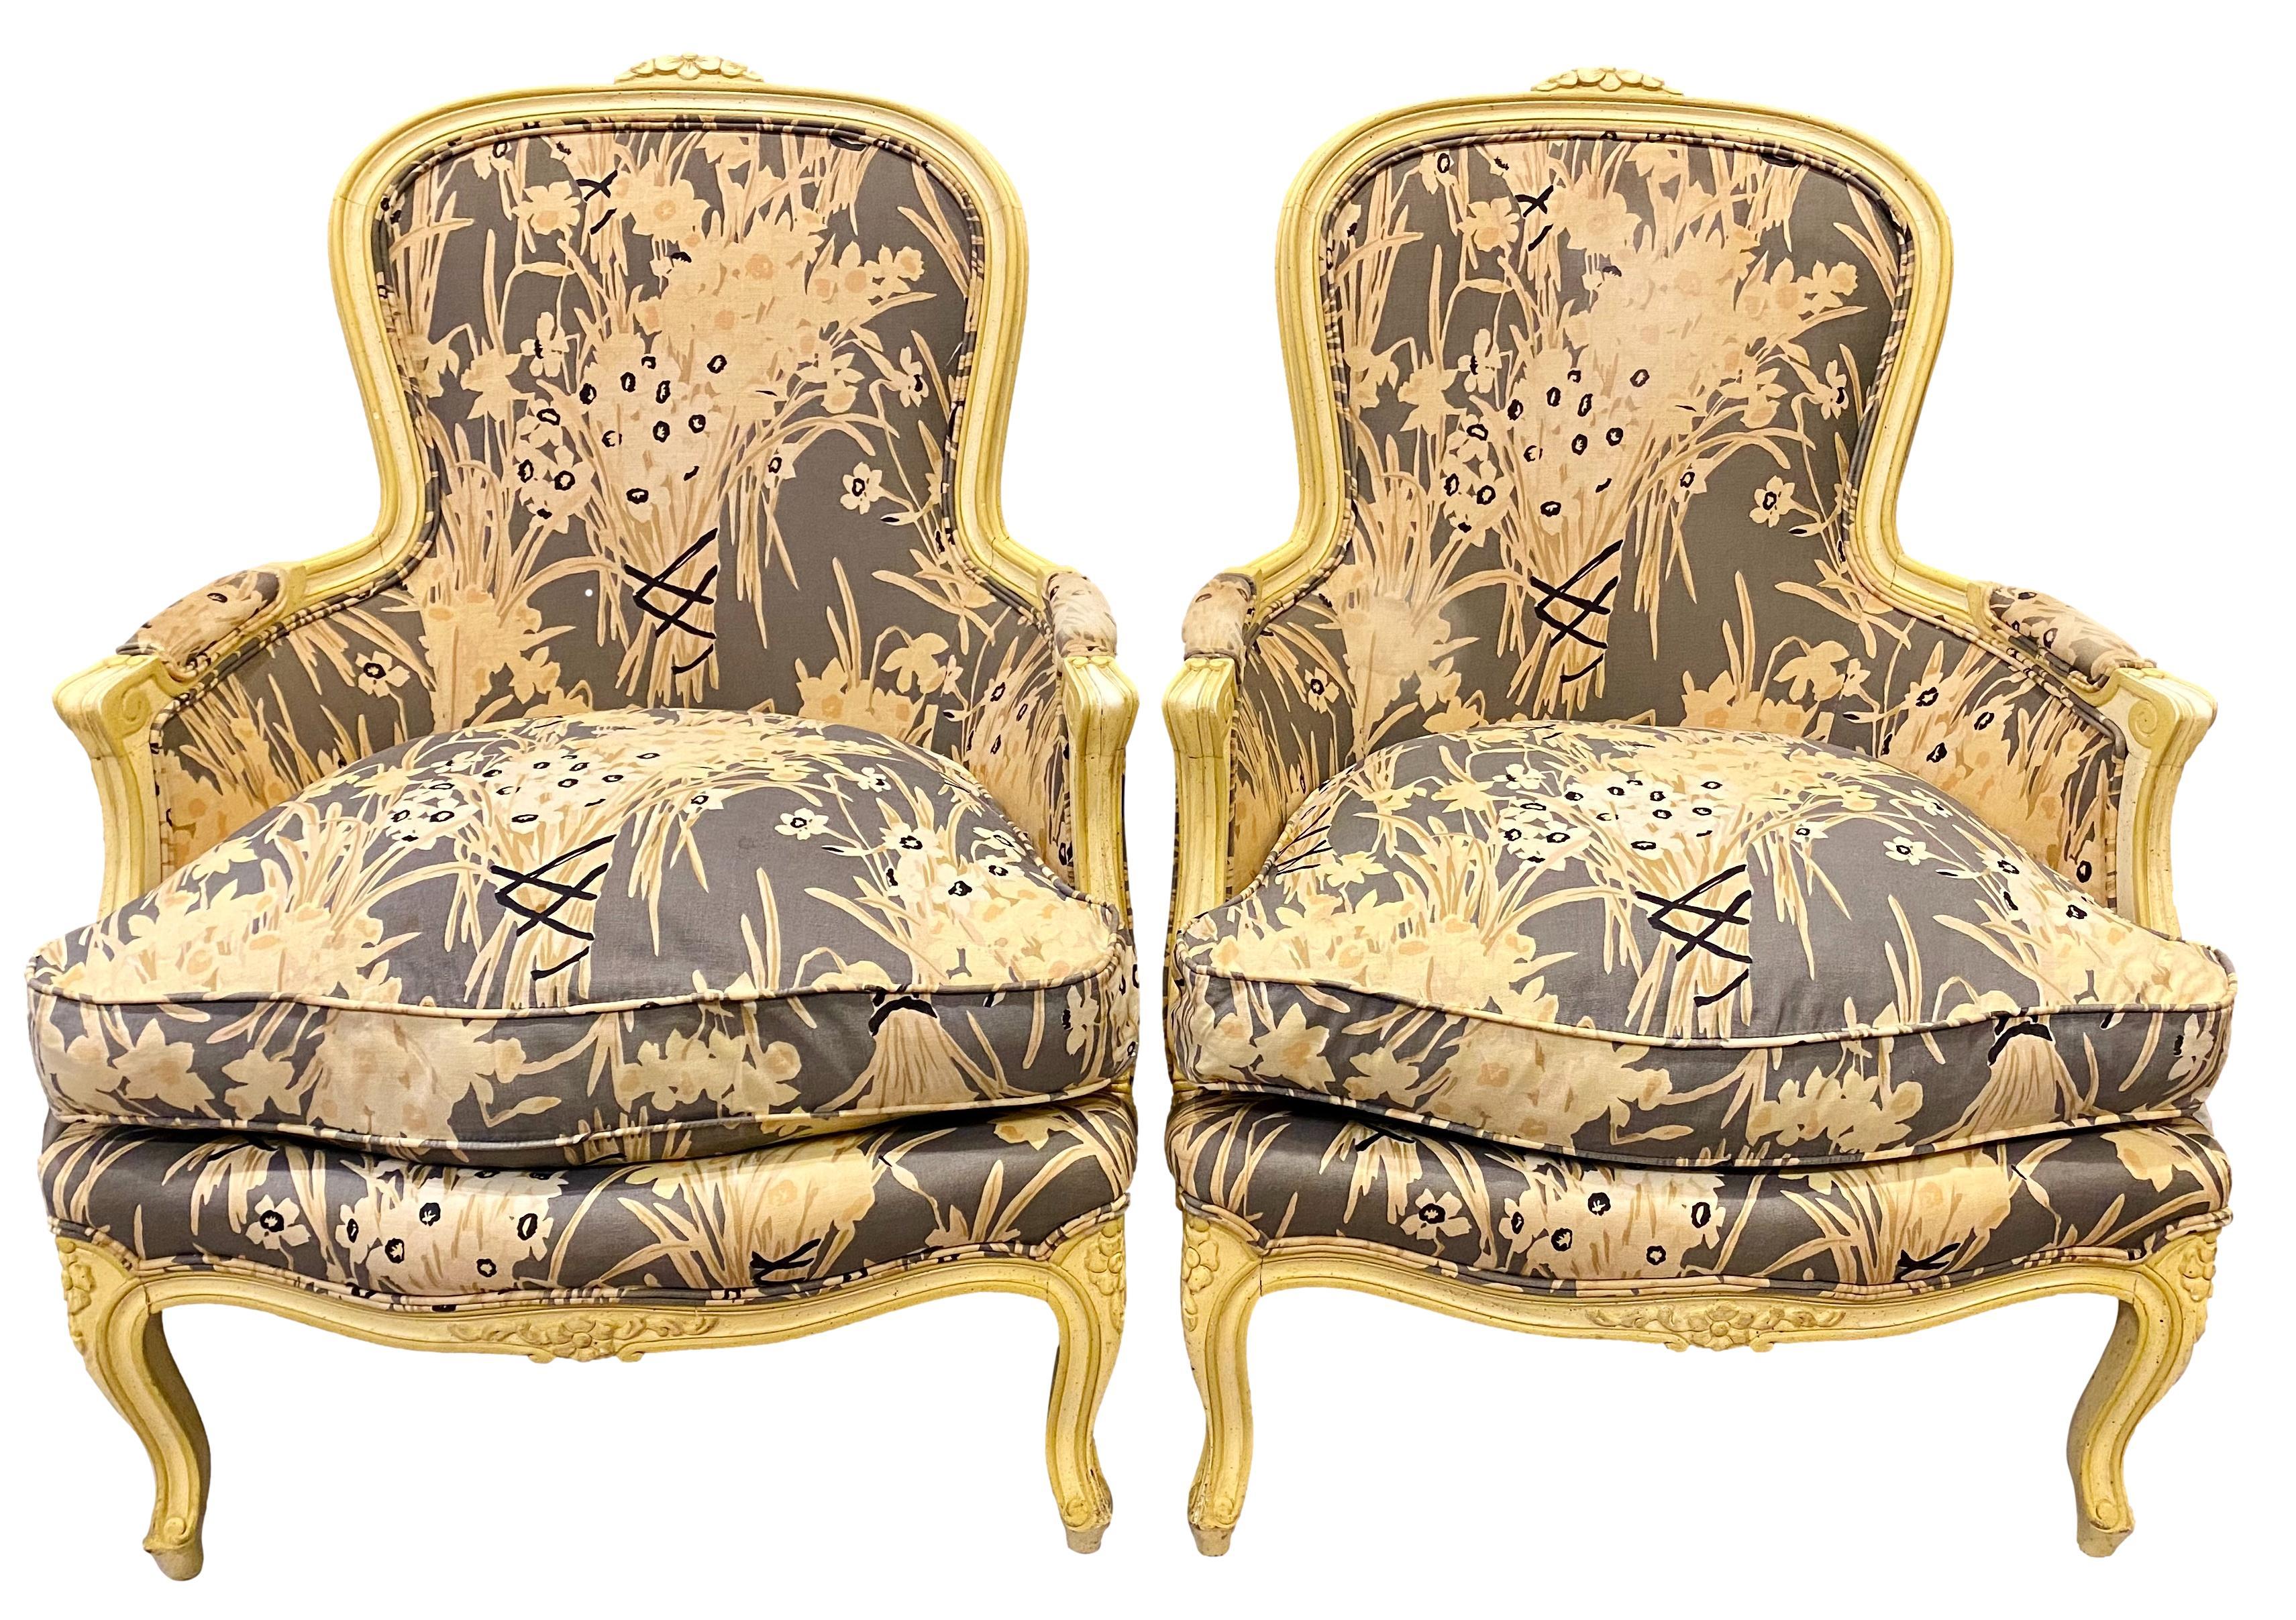 A late 1970s pair of French Louis XV style bergère chairs by Henredon. Carved and channeled wood frames with tonal cream finish. Cotton canvas upholstery fabric in beige-gray, tan, cream & gold with black accents. Down filled seat